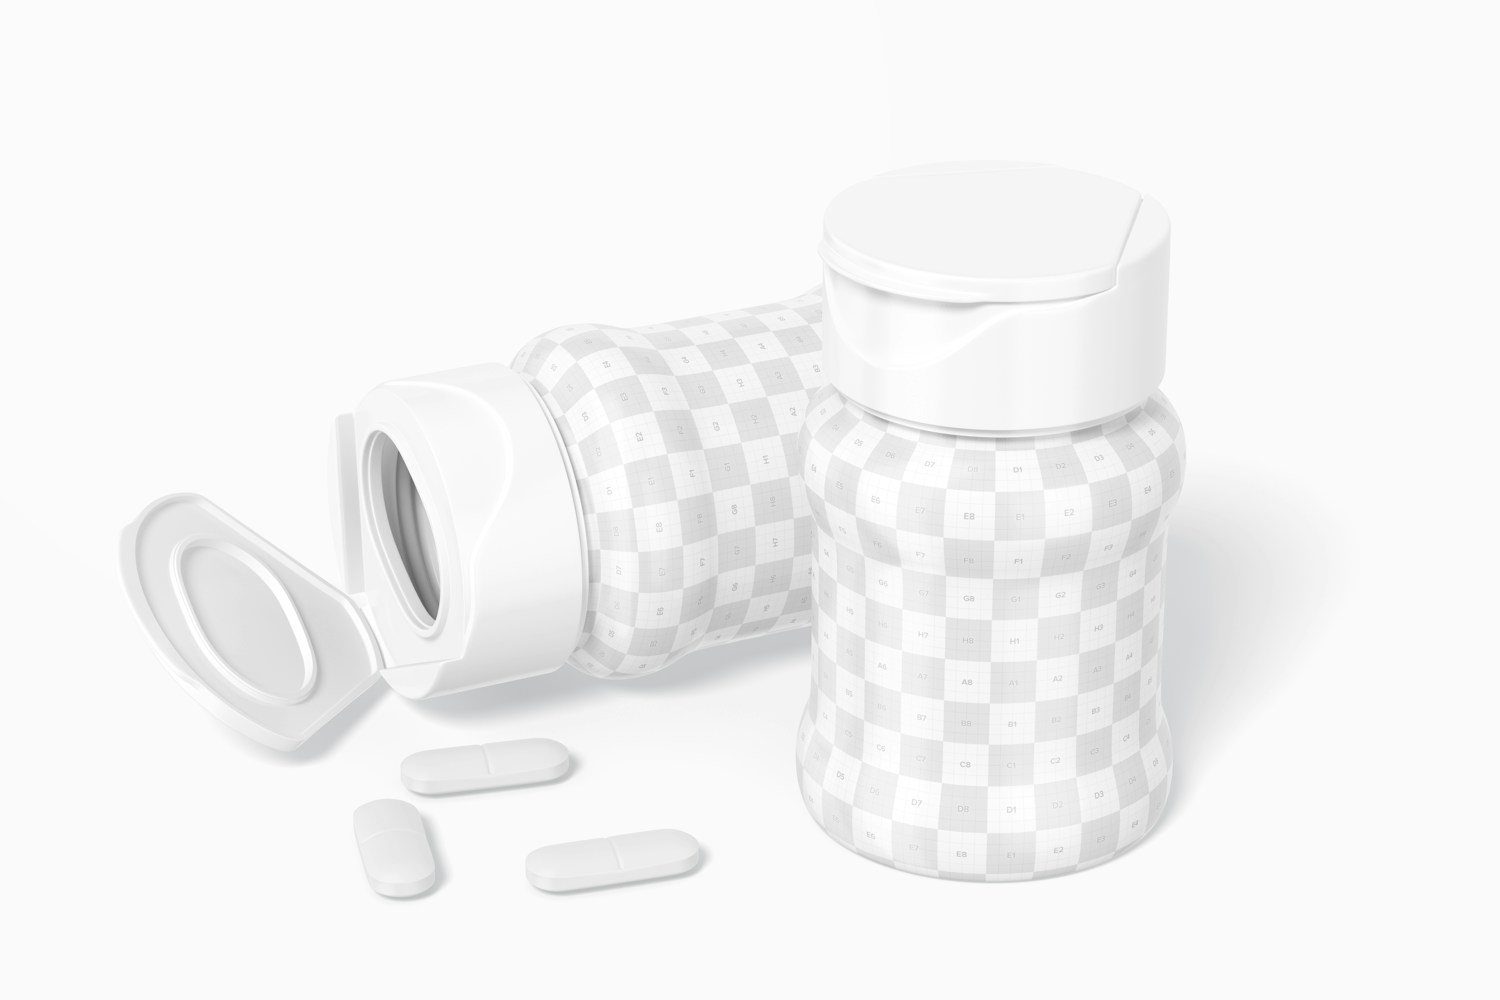 Small Pills Bottle Mockup, Opened and Closed